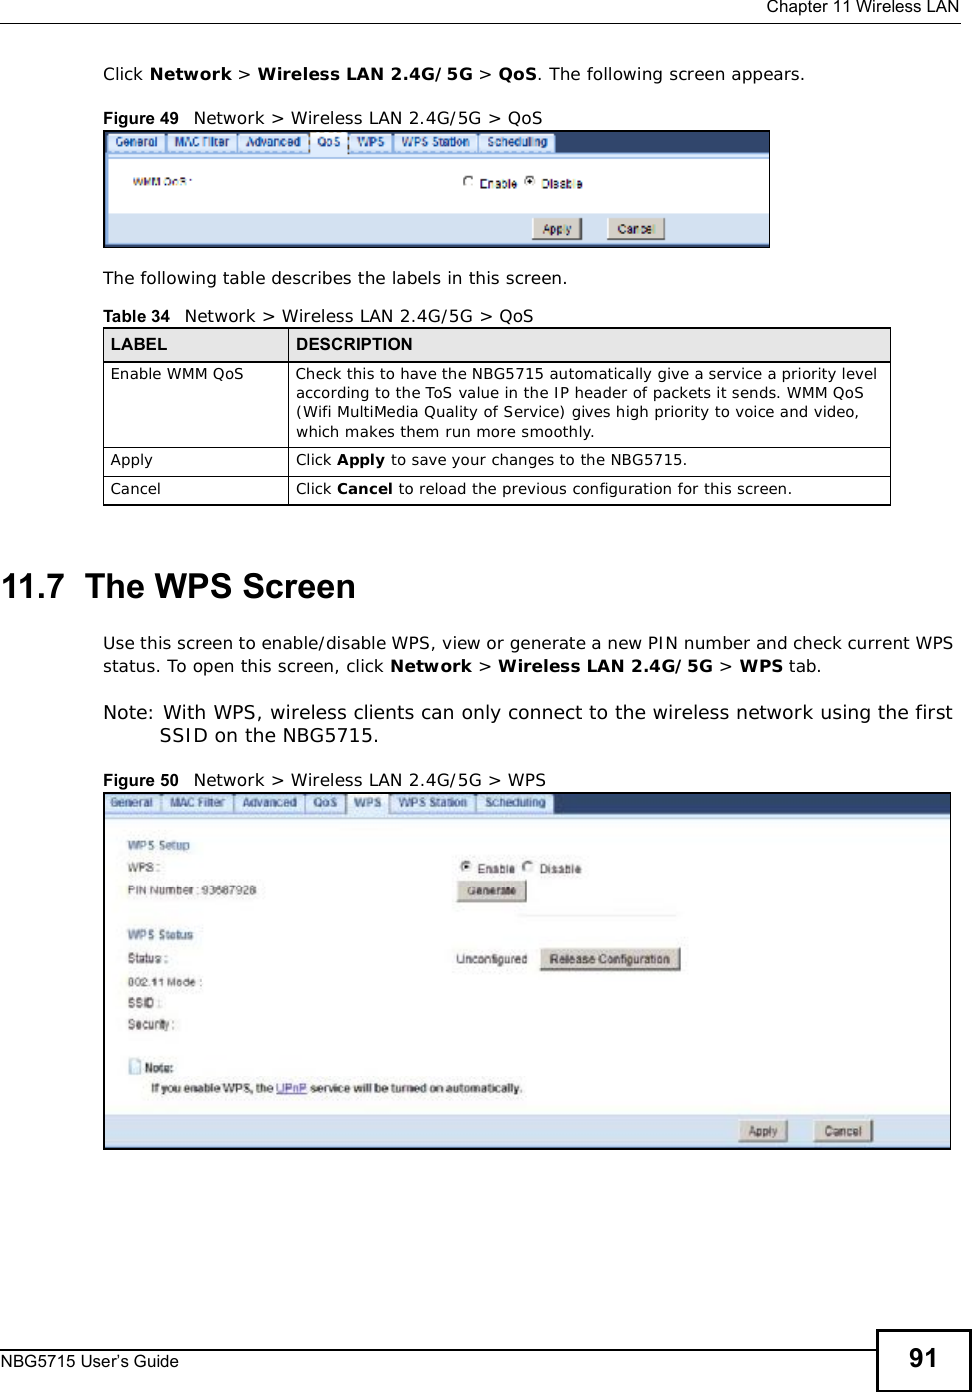  Chapter 11Wireless LANNBG5715 User’s Guide 91Click Network &gt; Wireless LAN 2.4G/5G &gt; QoS. The following screen appears.Figure 49   Network &gt; Wireless LAN 2.4G/5G &gt; QoS The following table describes the labels in this screen. 11.7  The WPS ScreenUse this screen to enable/disable WPS, view or generate a new PIN number and check current WPS status. To open this screen, click Network &gt;Wireless LAN 2.4G/5G &gt; WPS tab.Note: With WPS, wireless clients can only connect to the wireless network using the first SSID on the NBG5715.Figure 50   Network &gt; Wireless LAN 2.4G/5G &gt; WPSTable 34   Network &gt; Wireless LAN 2.4G/5G &gt; QoSLABEL DESCRIPTIONEnable WMM QoSCheck this to have the NBG5715 automatically give a service a priority level according to the ToS value in the IP header of packets it sends. WMM QoS (Wifi MultiMedia Quality of Service) gives high priority to voice and video, which makes them run more smoothly.Apply Click Apply to save your changes to the NBG5715.Cancel Click Cancel to reload the previous configuration for this screen.